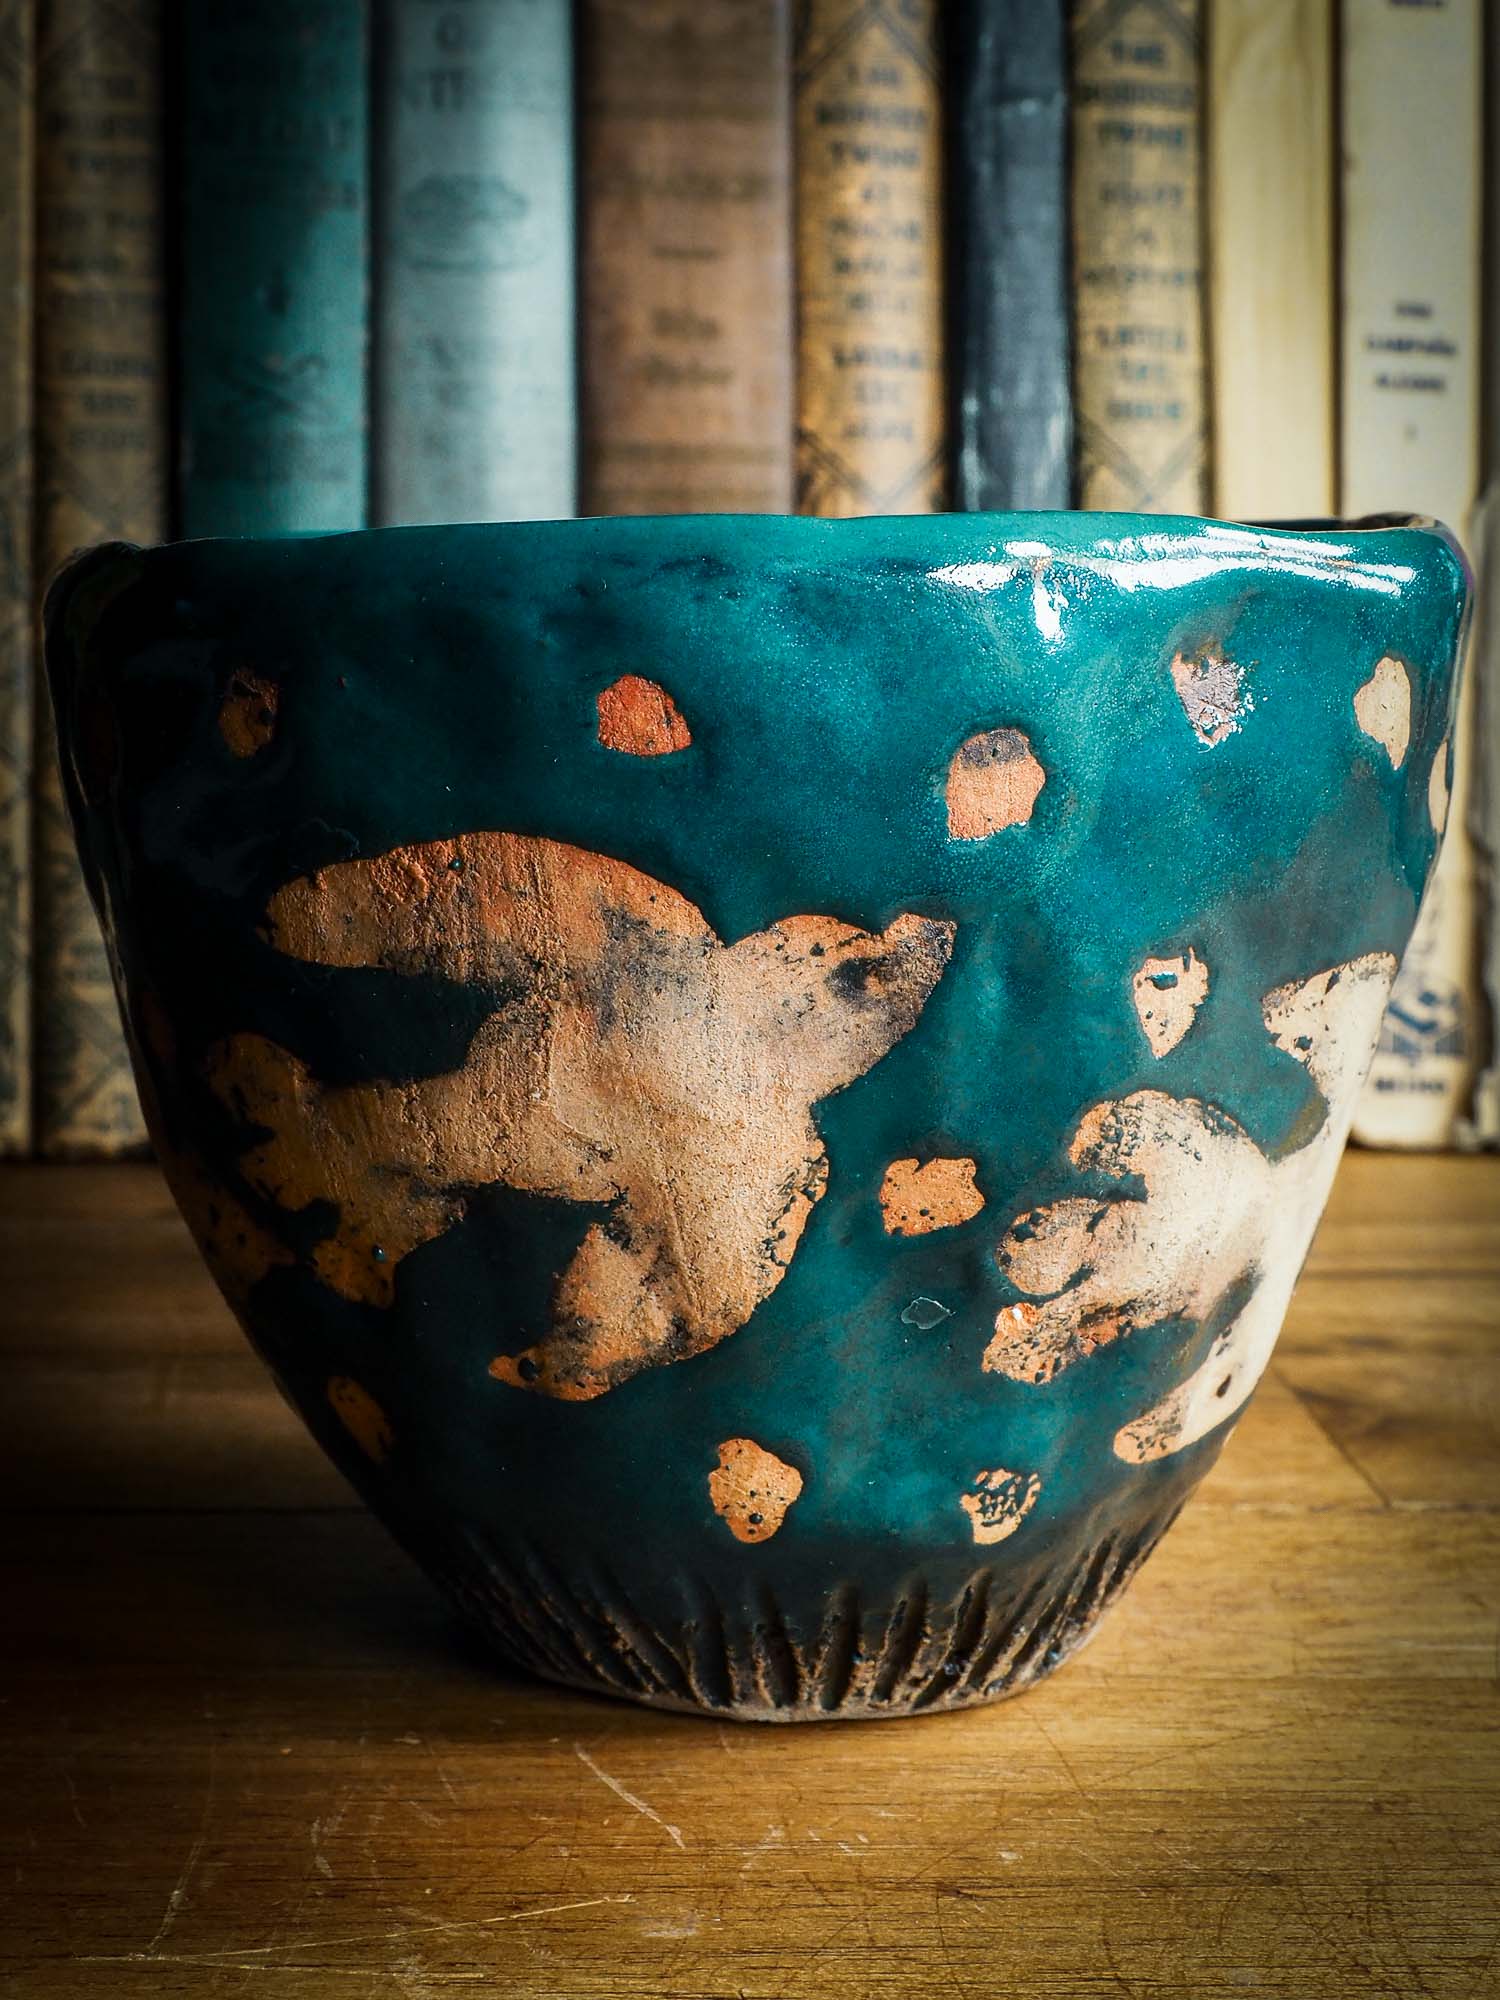 An original Idania Salcido Danita Art pinched ceramic free turquoise birds art bowl. Handmade from locally foraged clay, this glazed ceramics one of a kind artwork is perfect for any kitchen plate and bowls unique collection. food safe hand wash only bowl. Blue turquoise glaze contrasts with raw clay colored flying handmade birds.